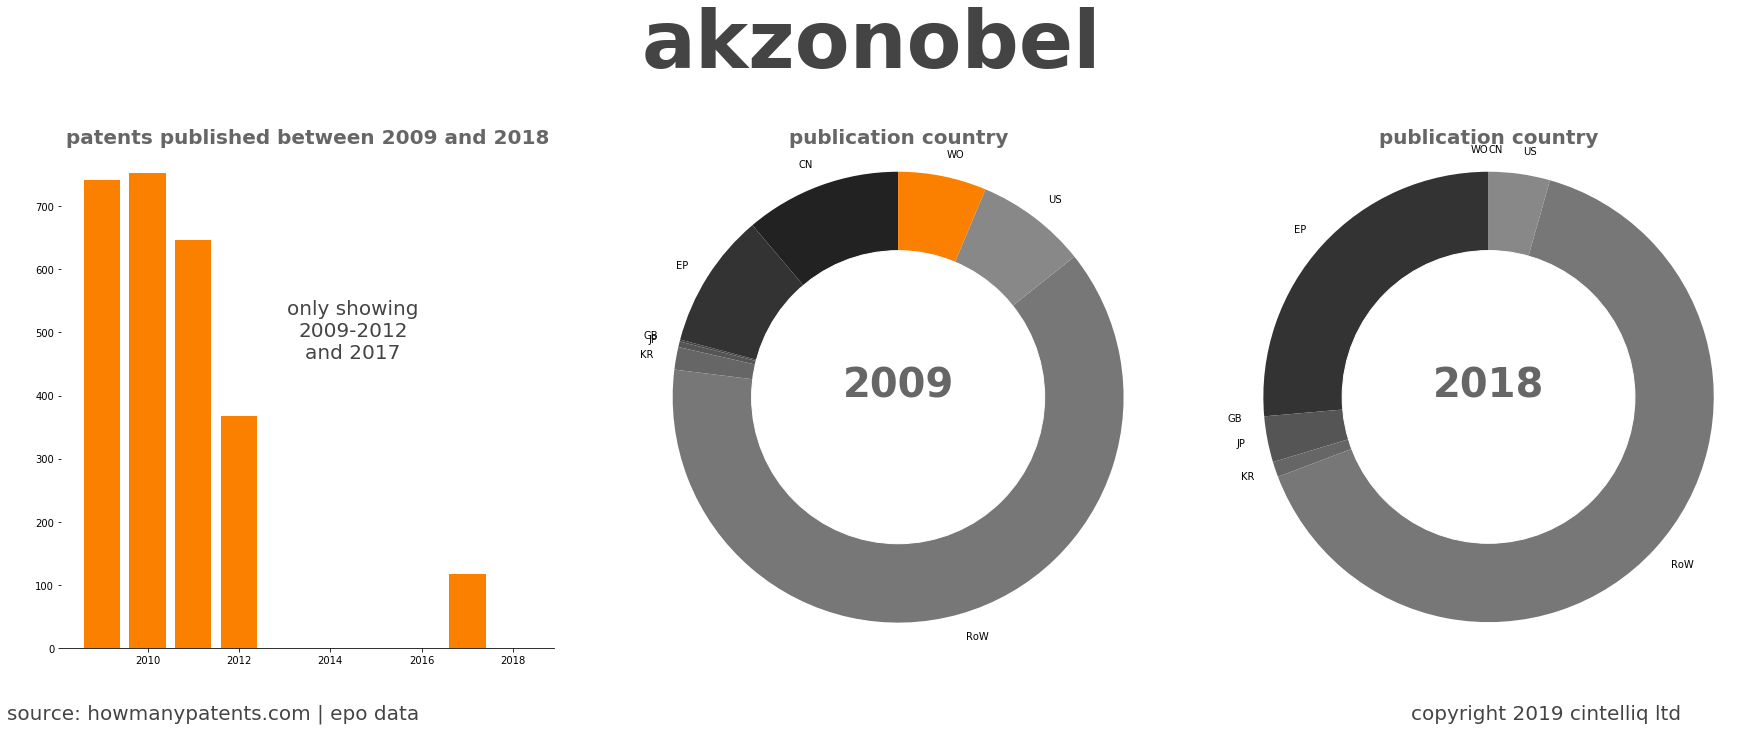 summary of patents for Akzonobel